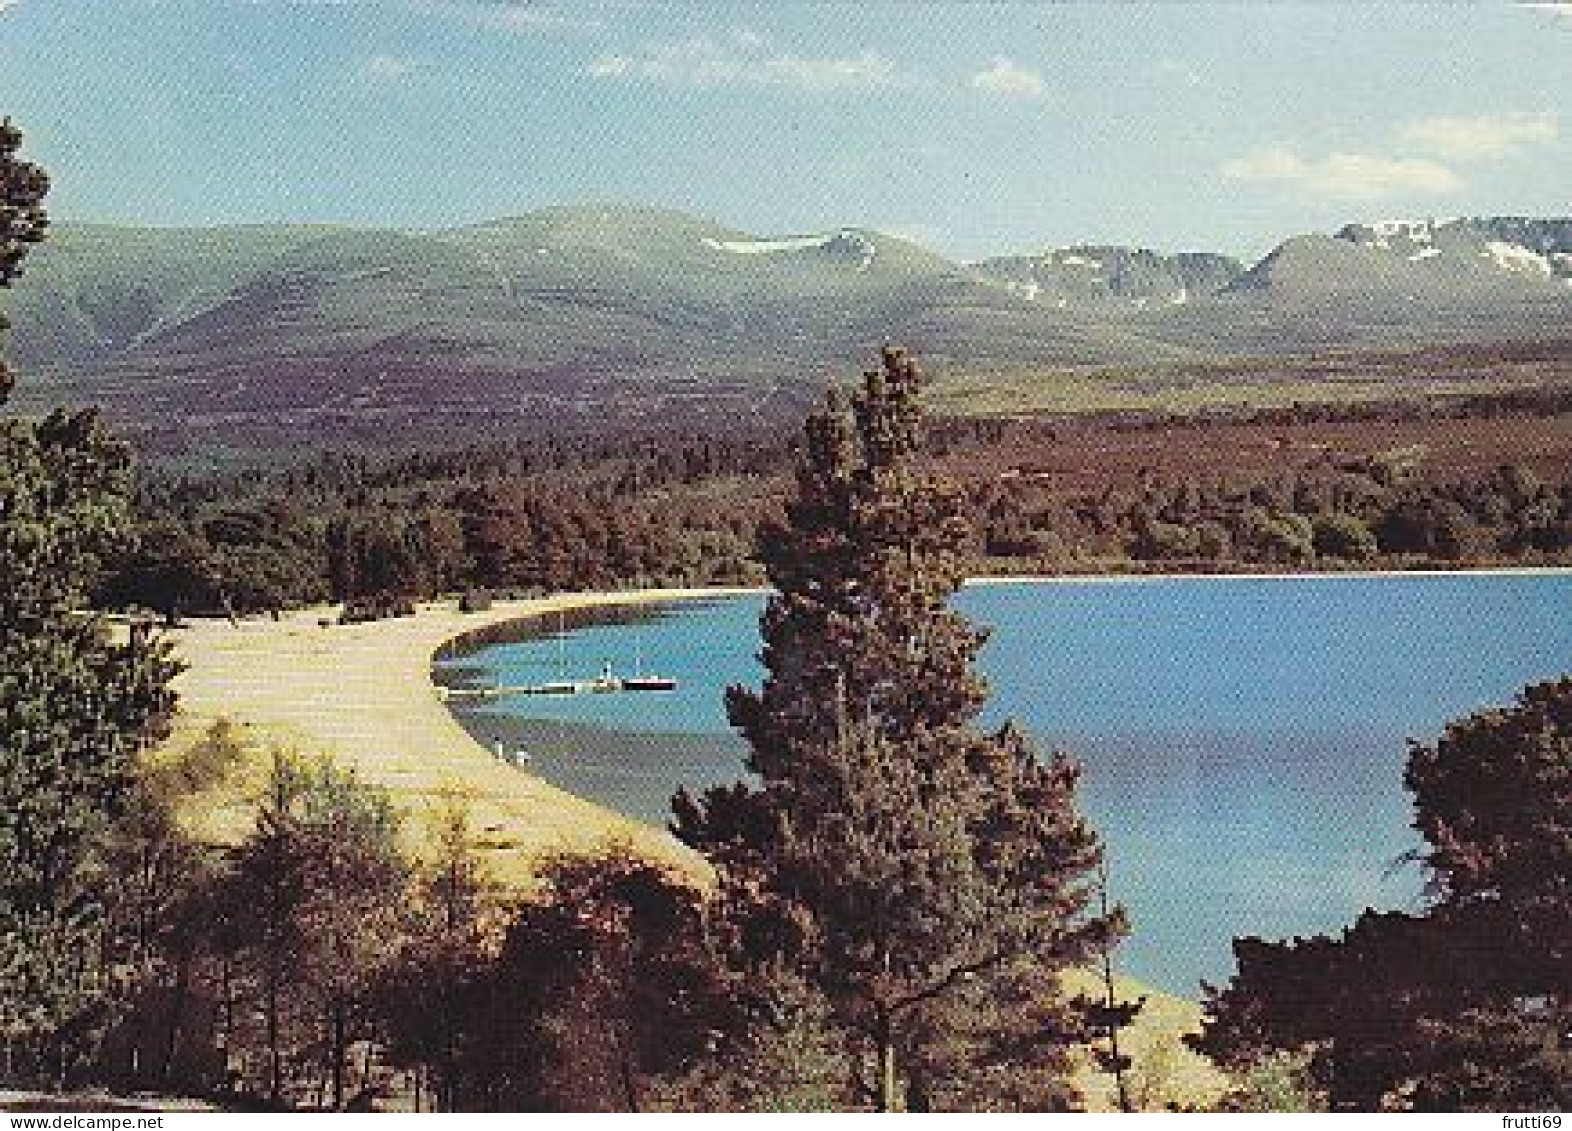 AK 164582 SCOTLAND - Loch Morlich And The Cairngorms - Inverness-shire